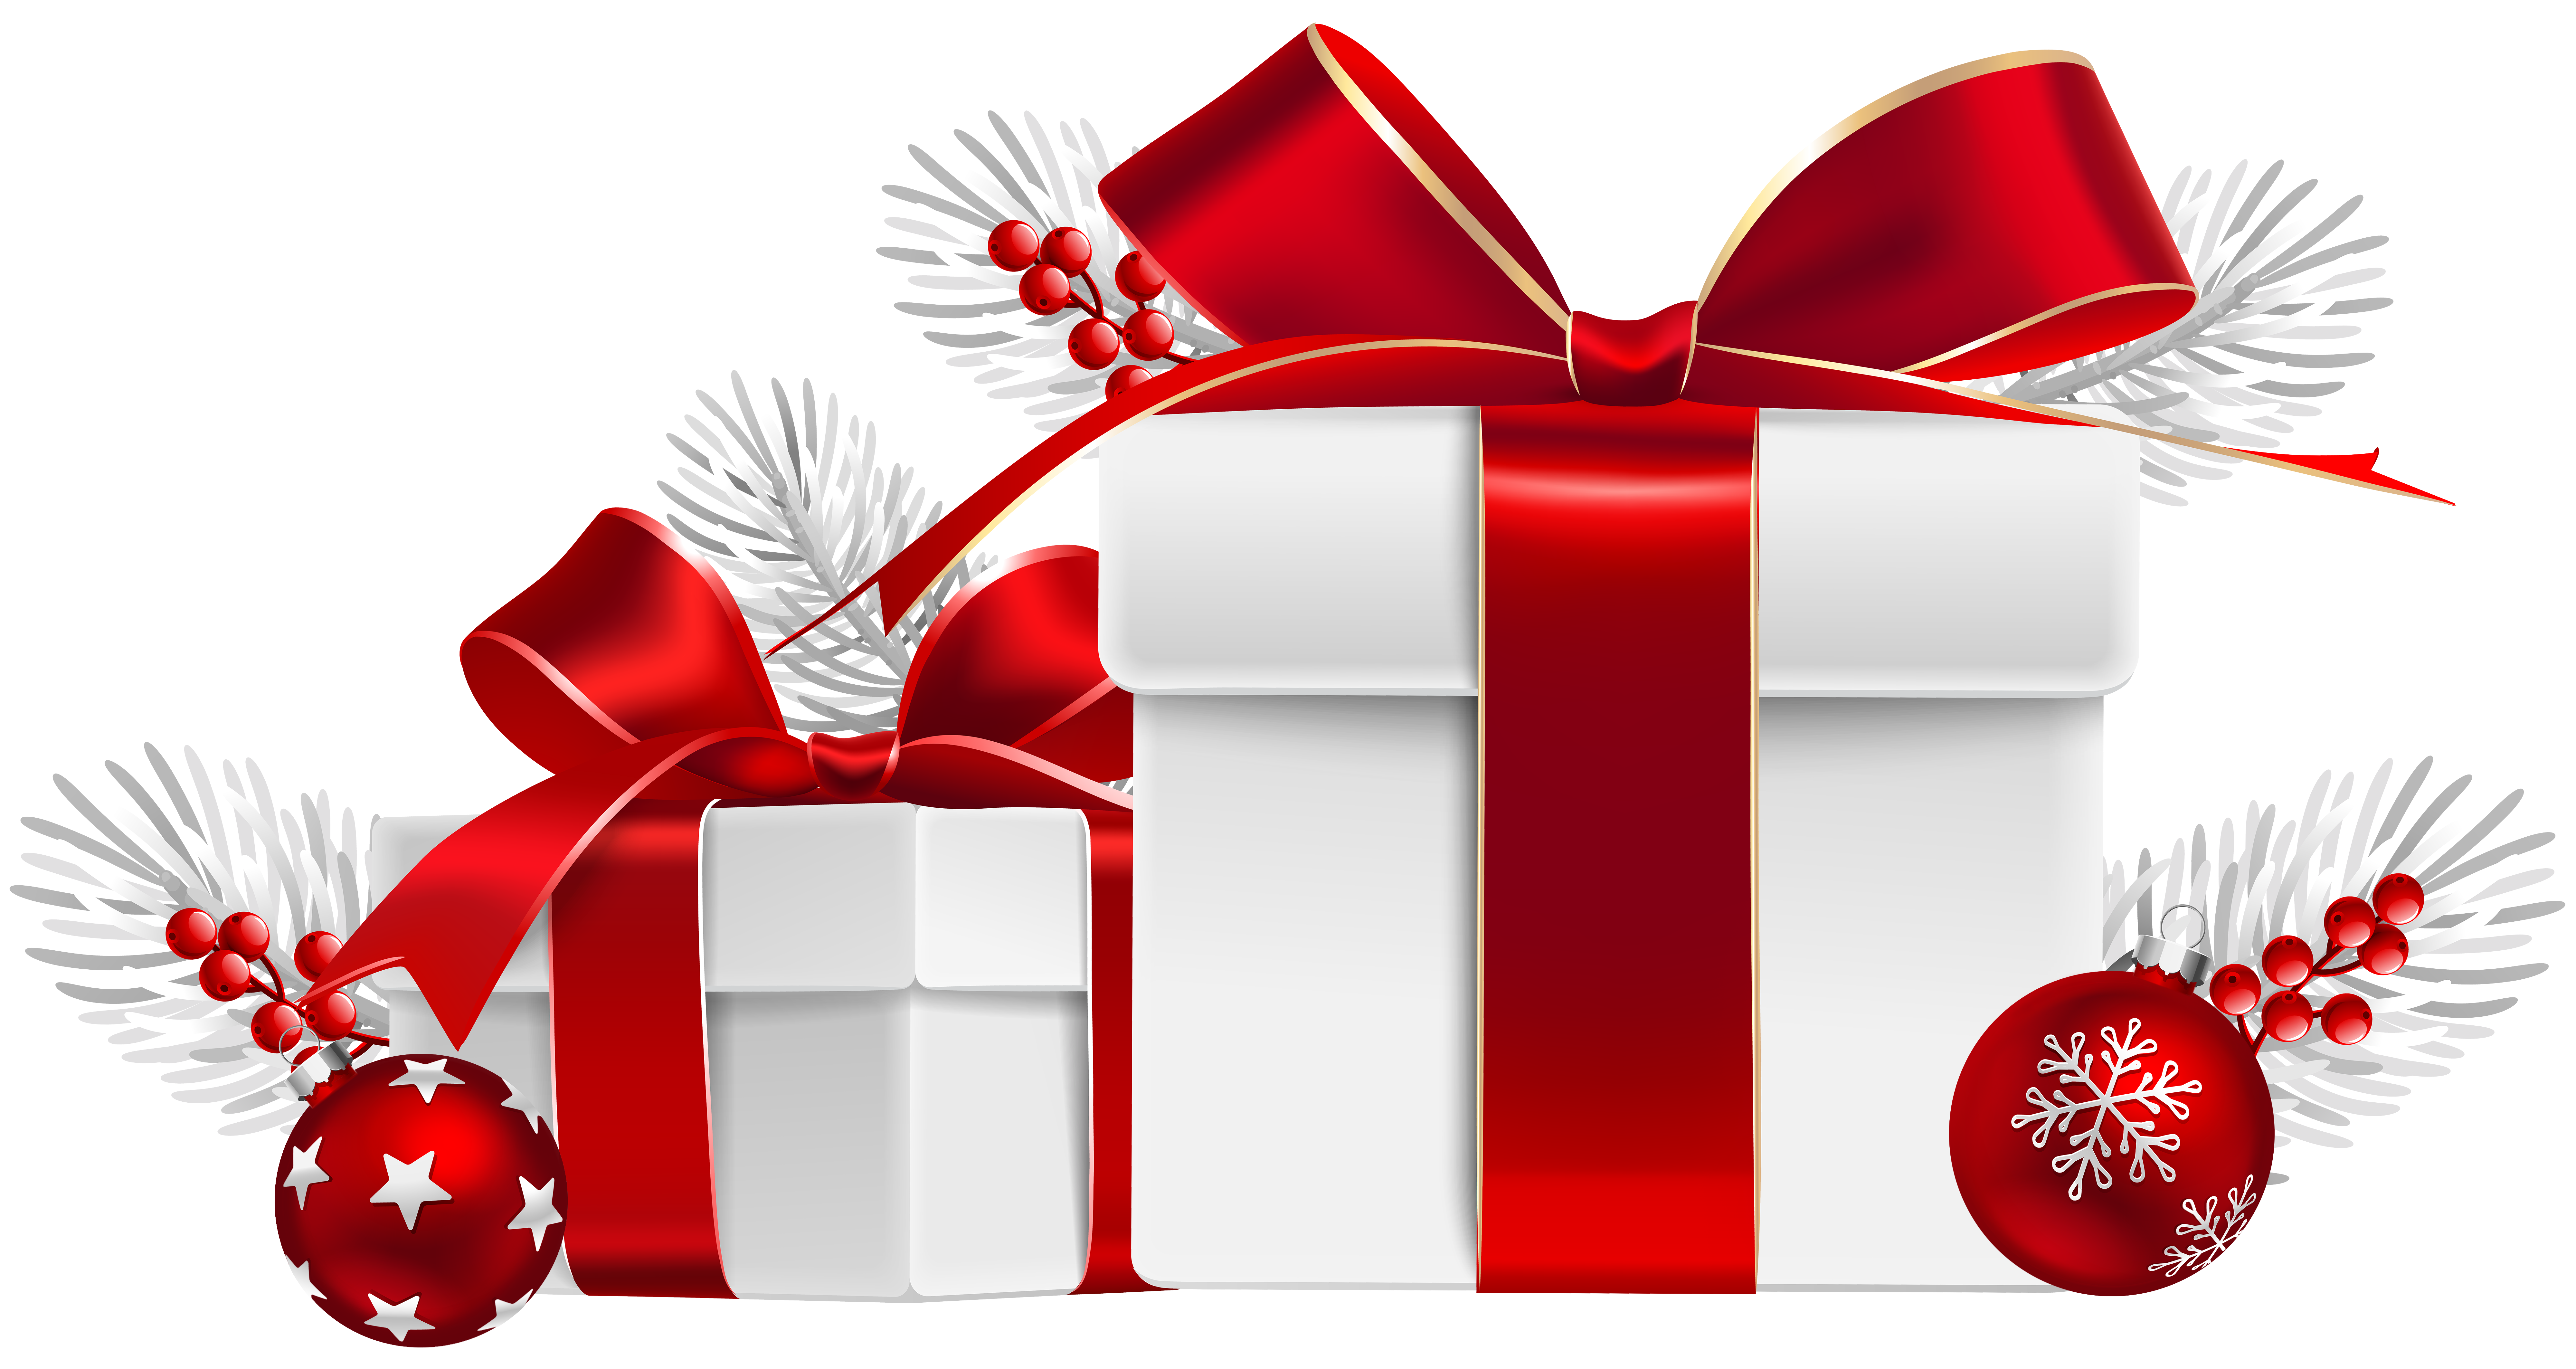 https://gallery.yopriceville.com/var/albums/Free-Clipart-Pictures/Christmas-PNG/Christmas_Gifts_Transparent_Clip_Art_Image.png?m=1513914902